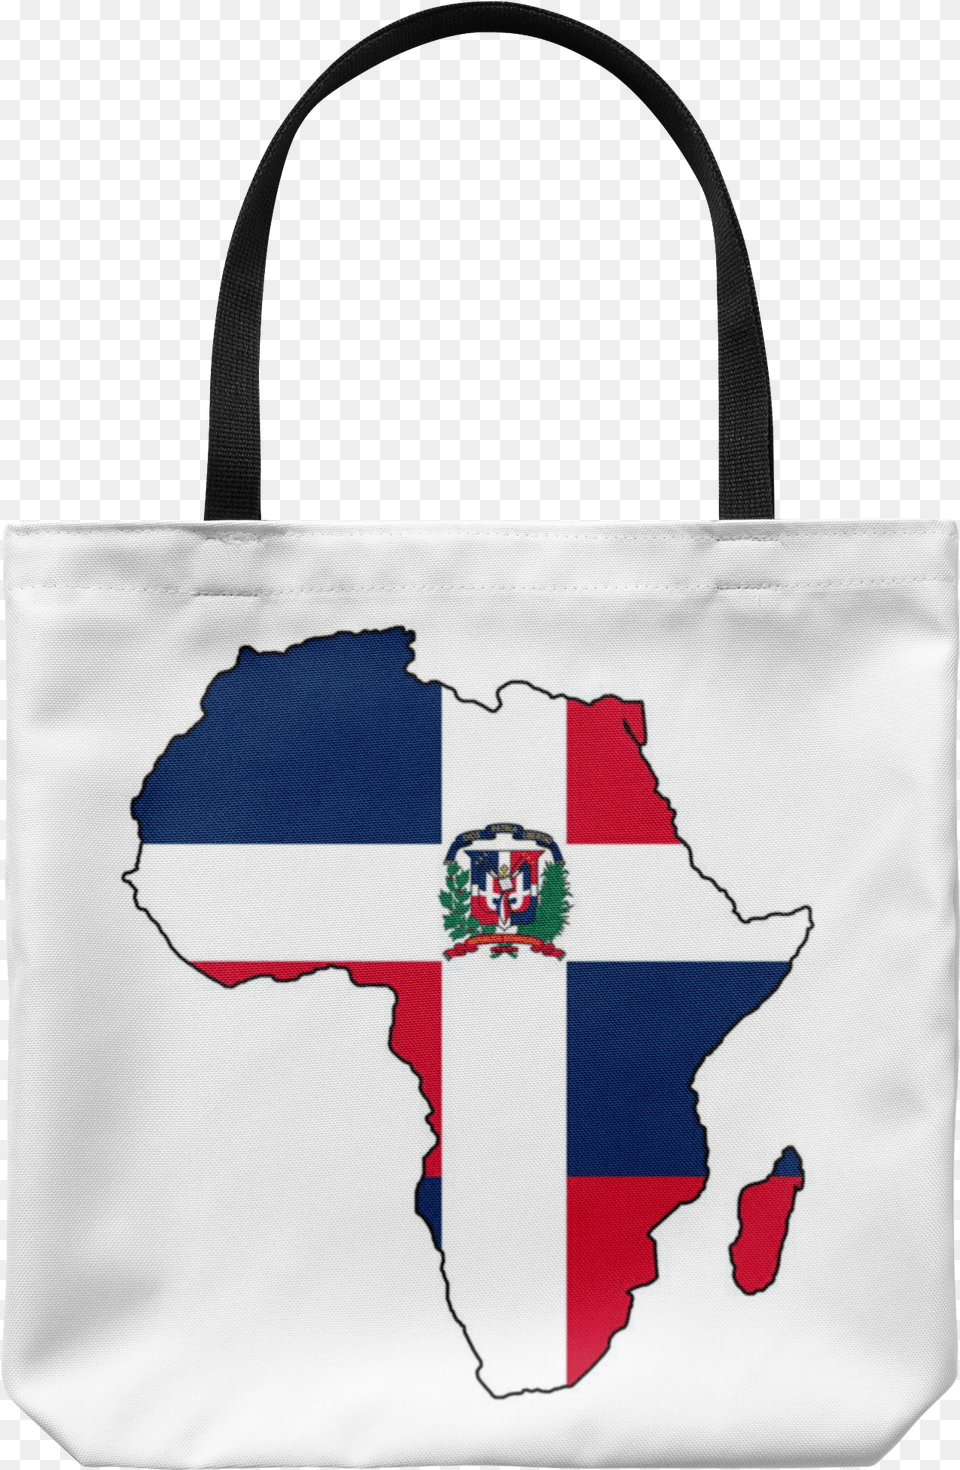 Africa Dominican Republic Tote Bag Clean Water In Africa Map, Accessories, Handbag, Tote Bag, Purse Free Png